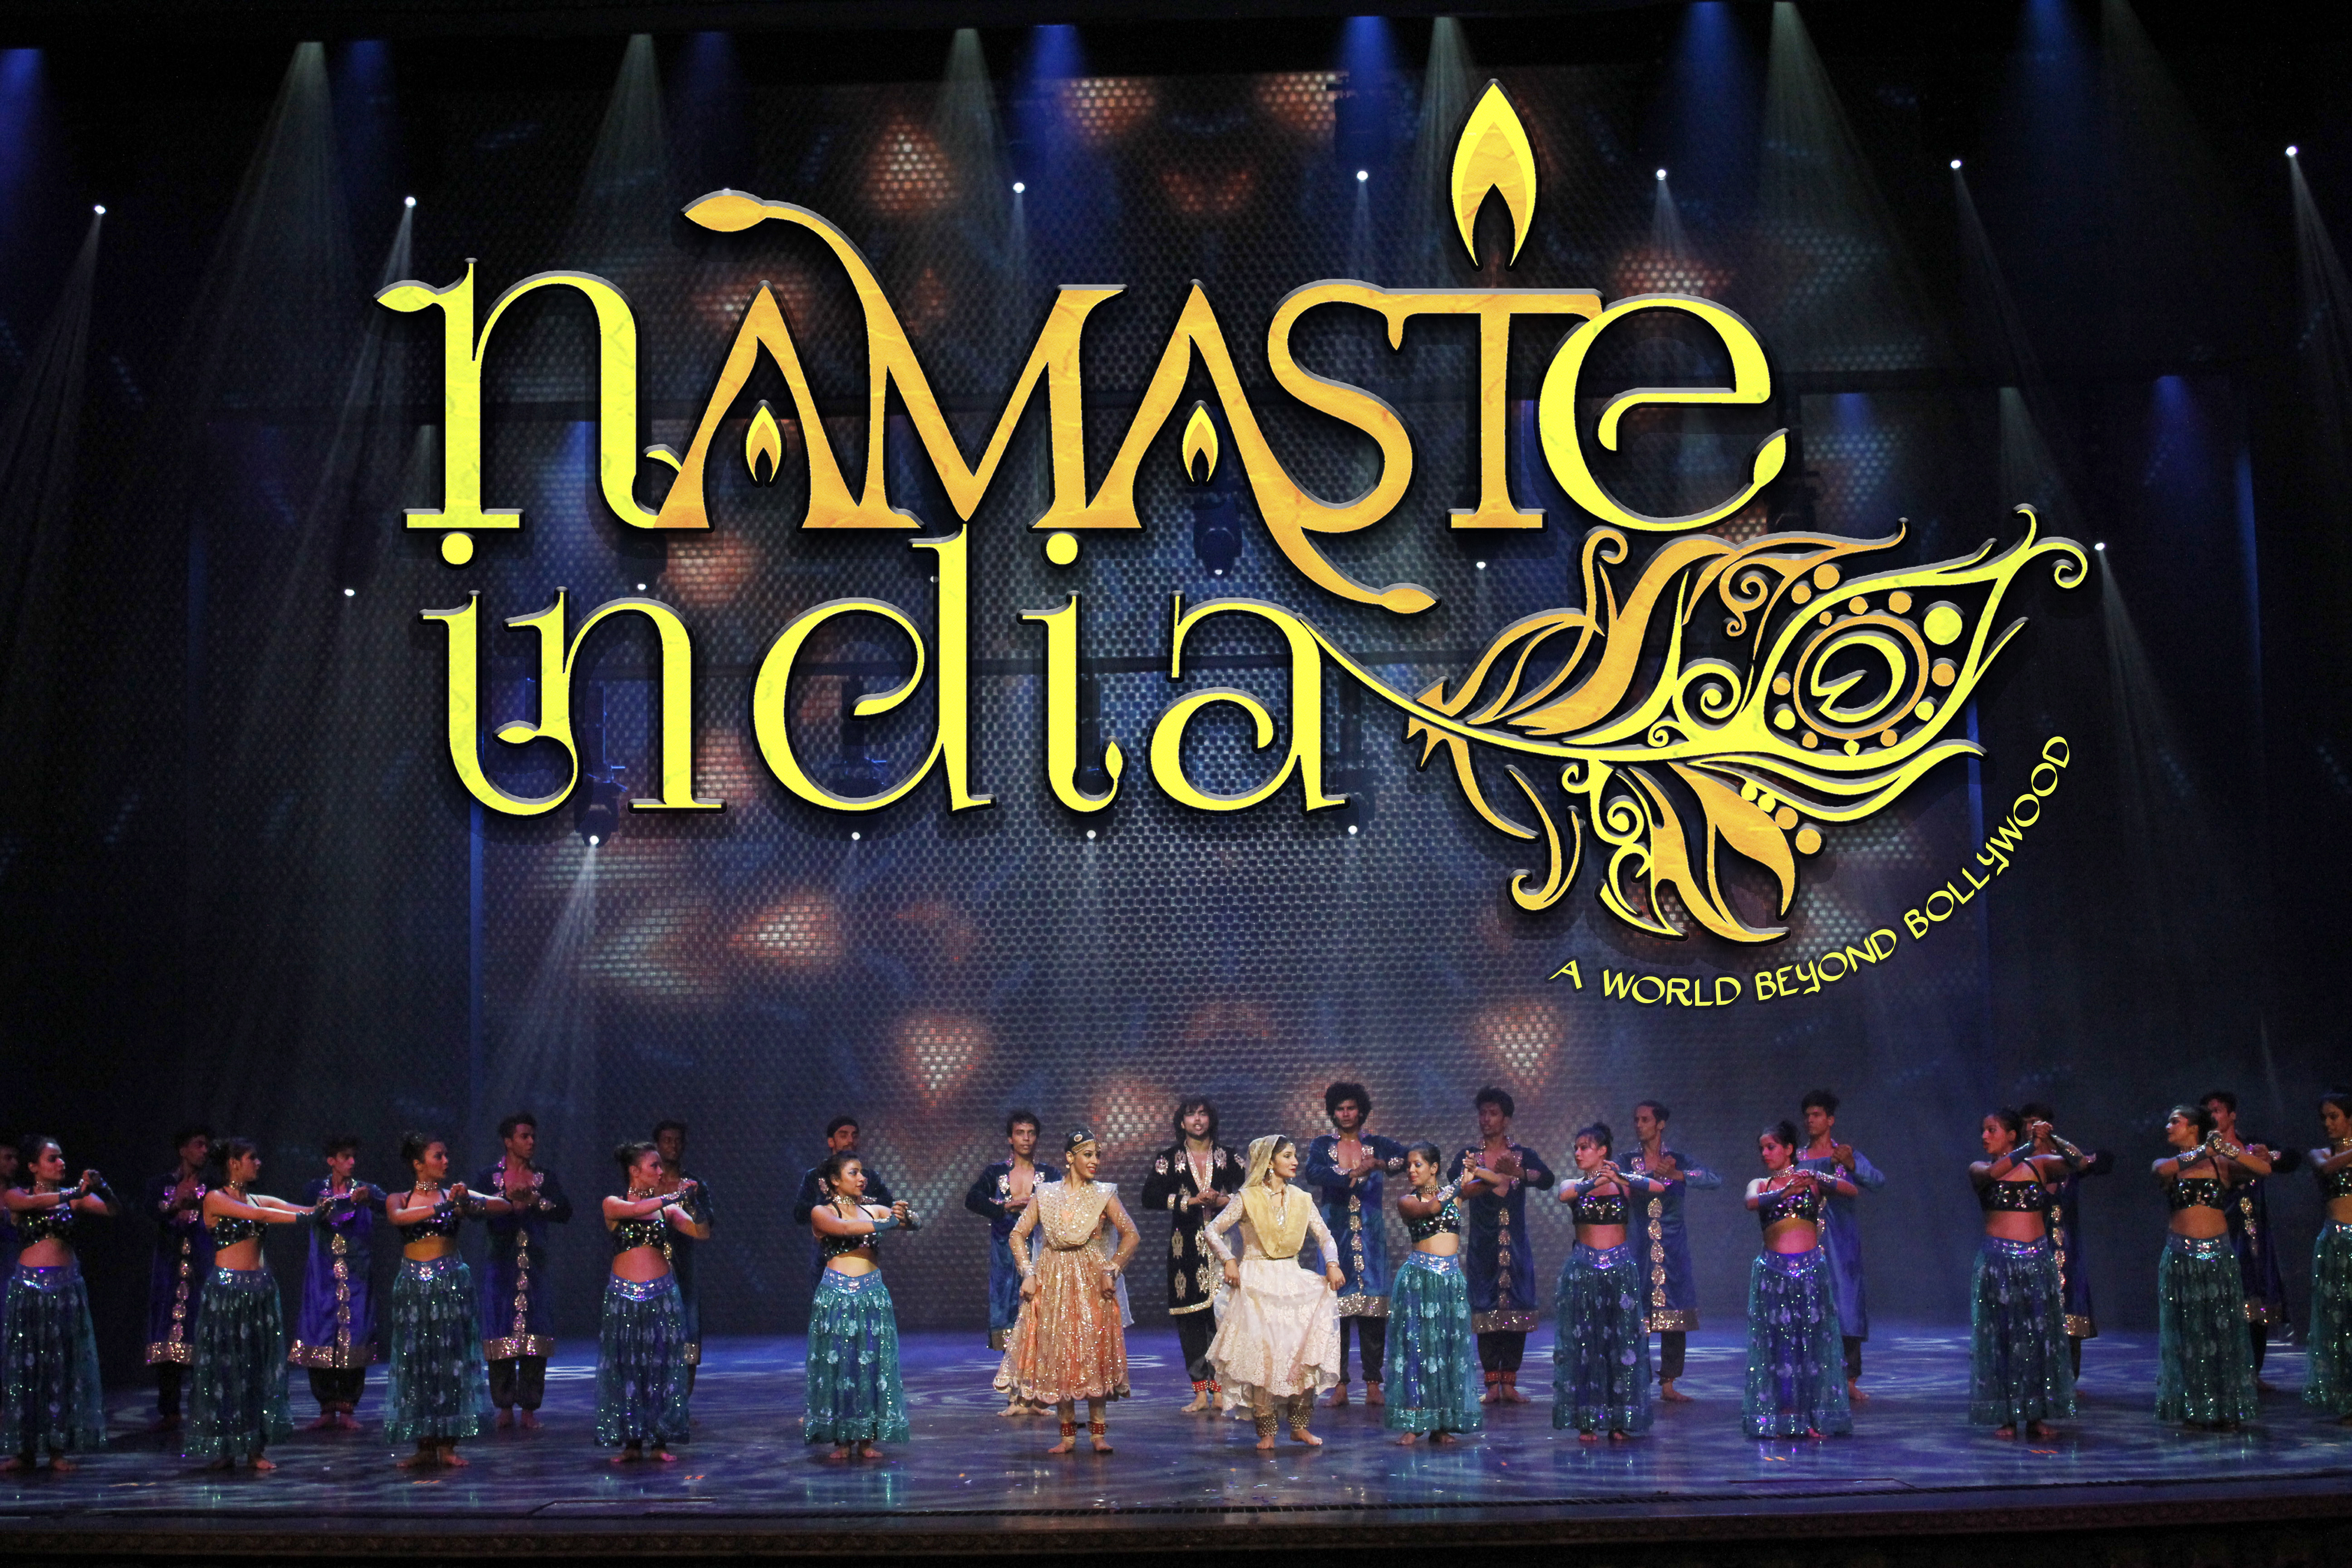 The cast of Namaste India dancing onstage